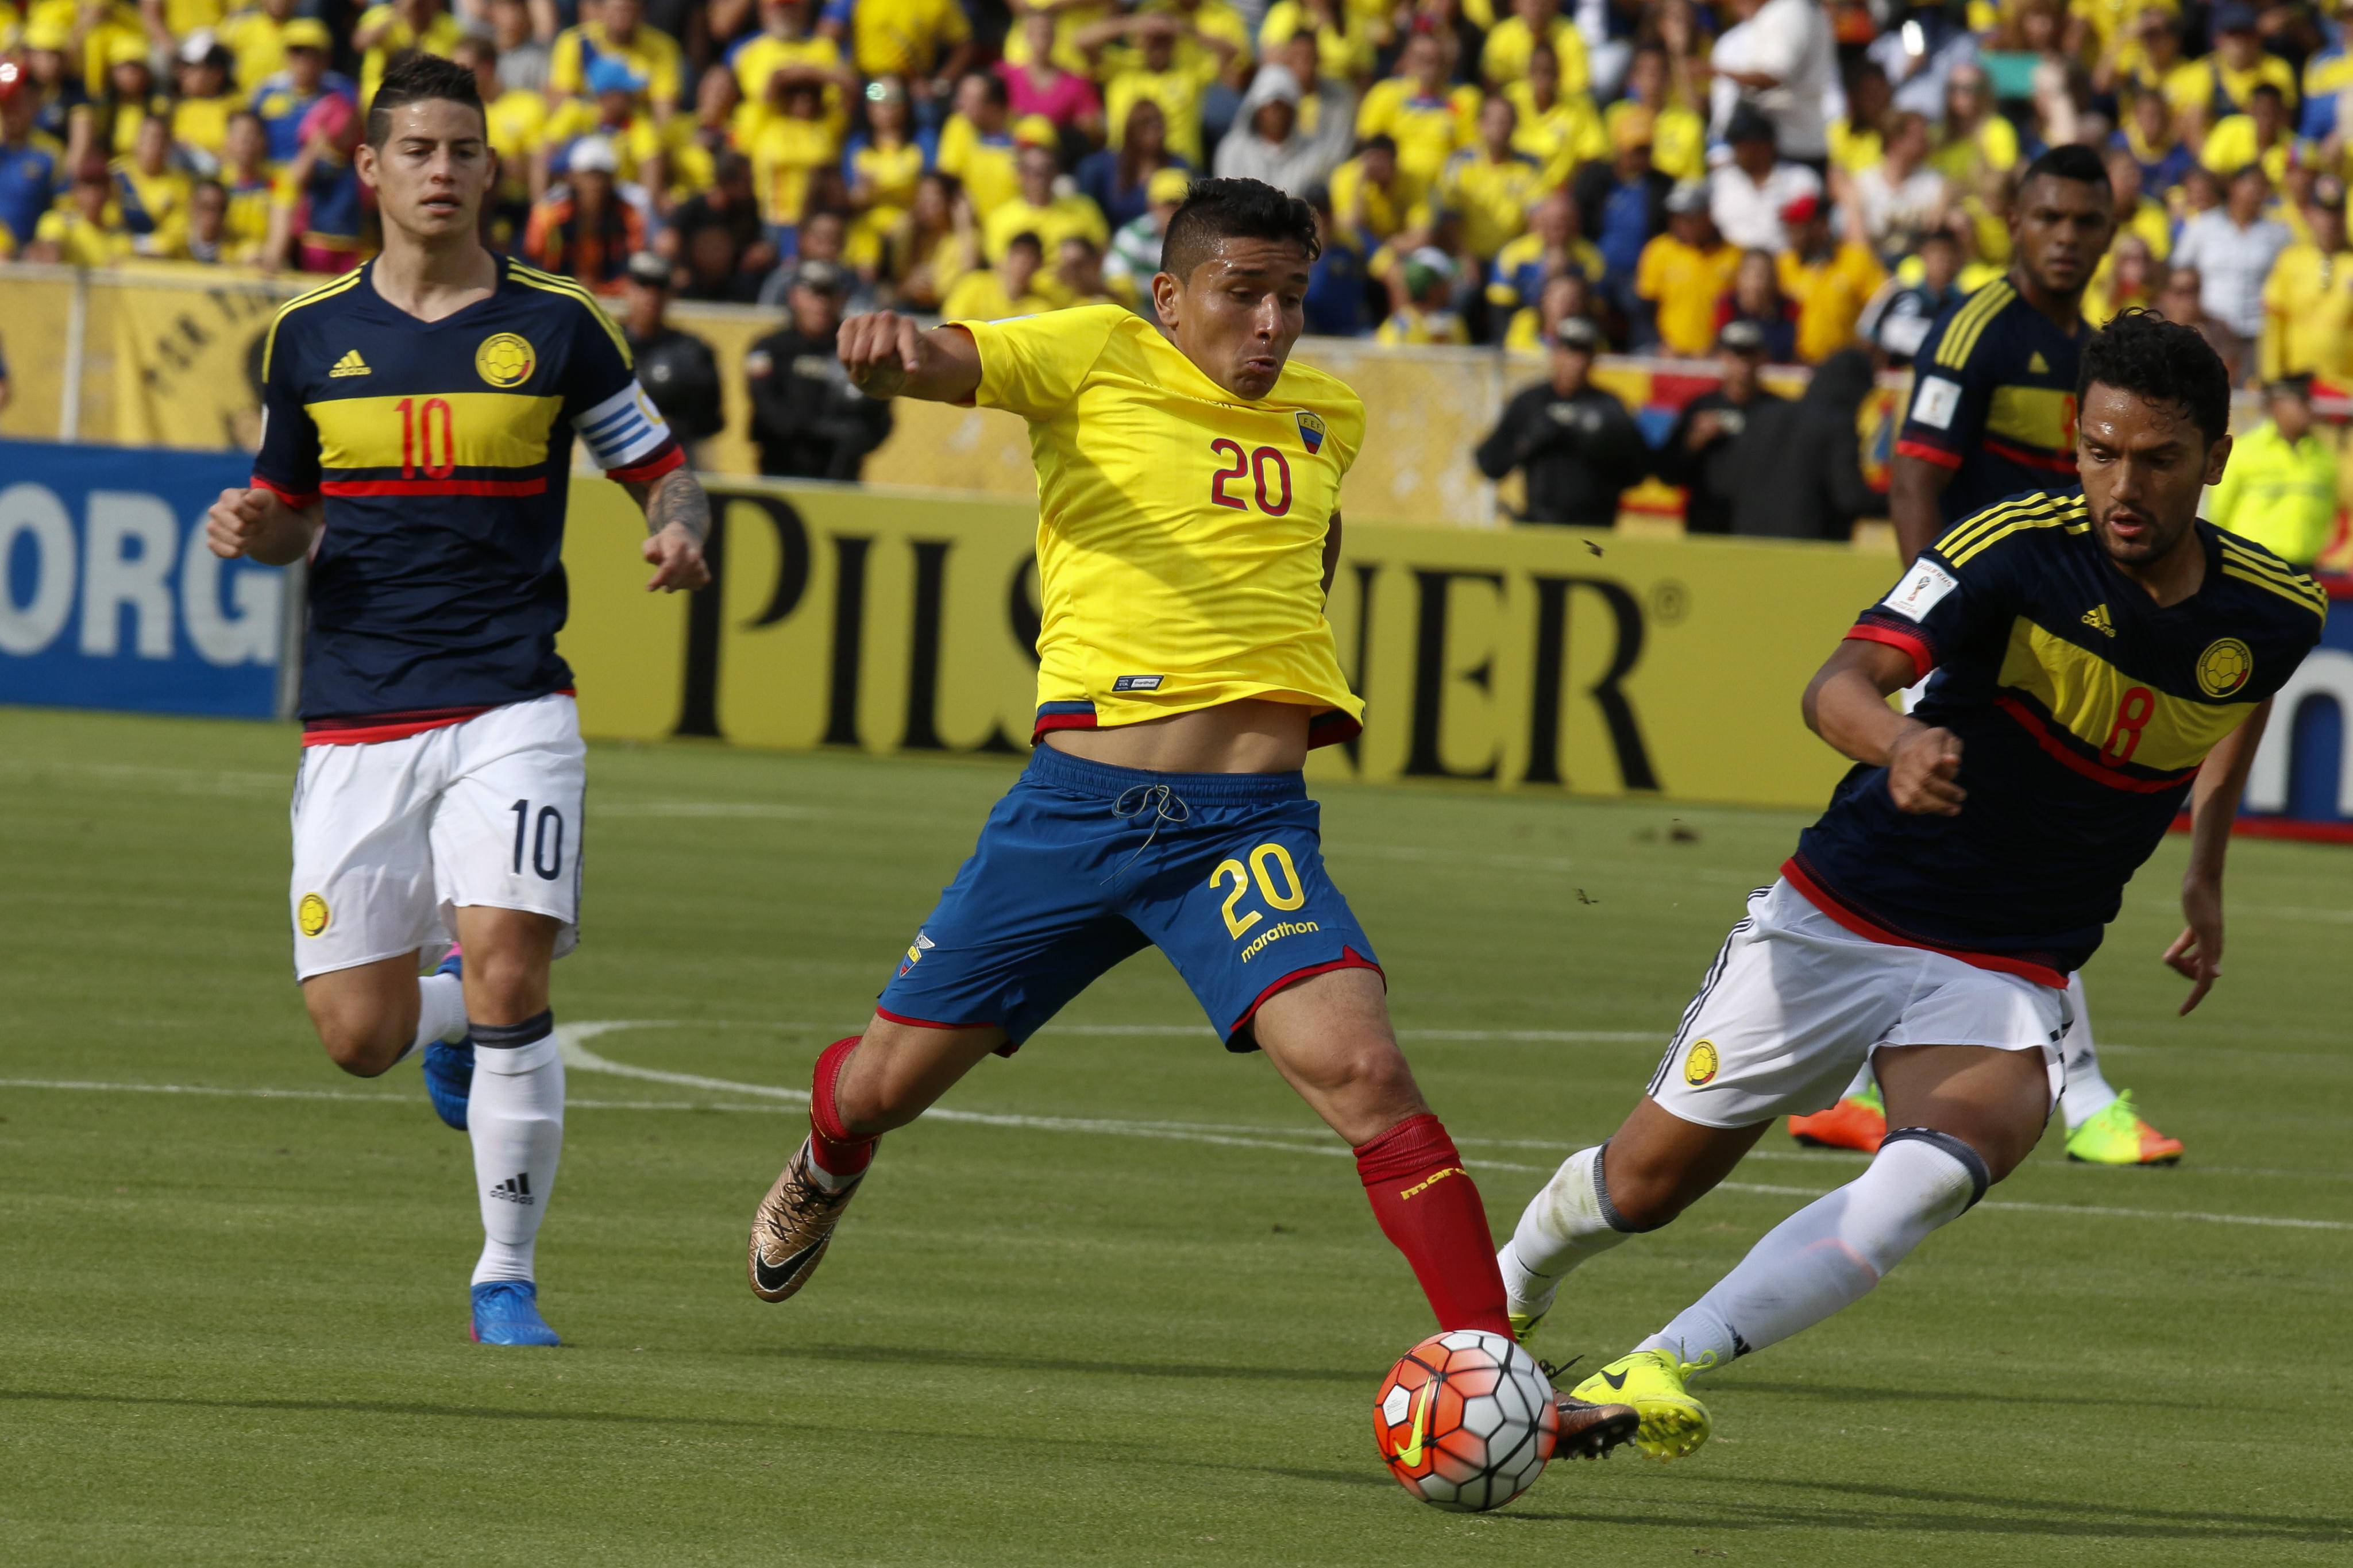 Ecuador S Mario Pineida C Vies For The Ball With James Rodriguez L And Abel Aguilar Of Colombia